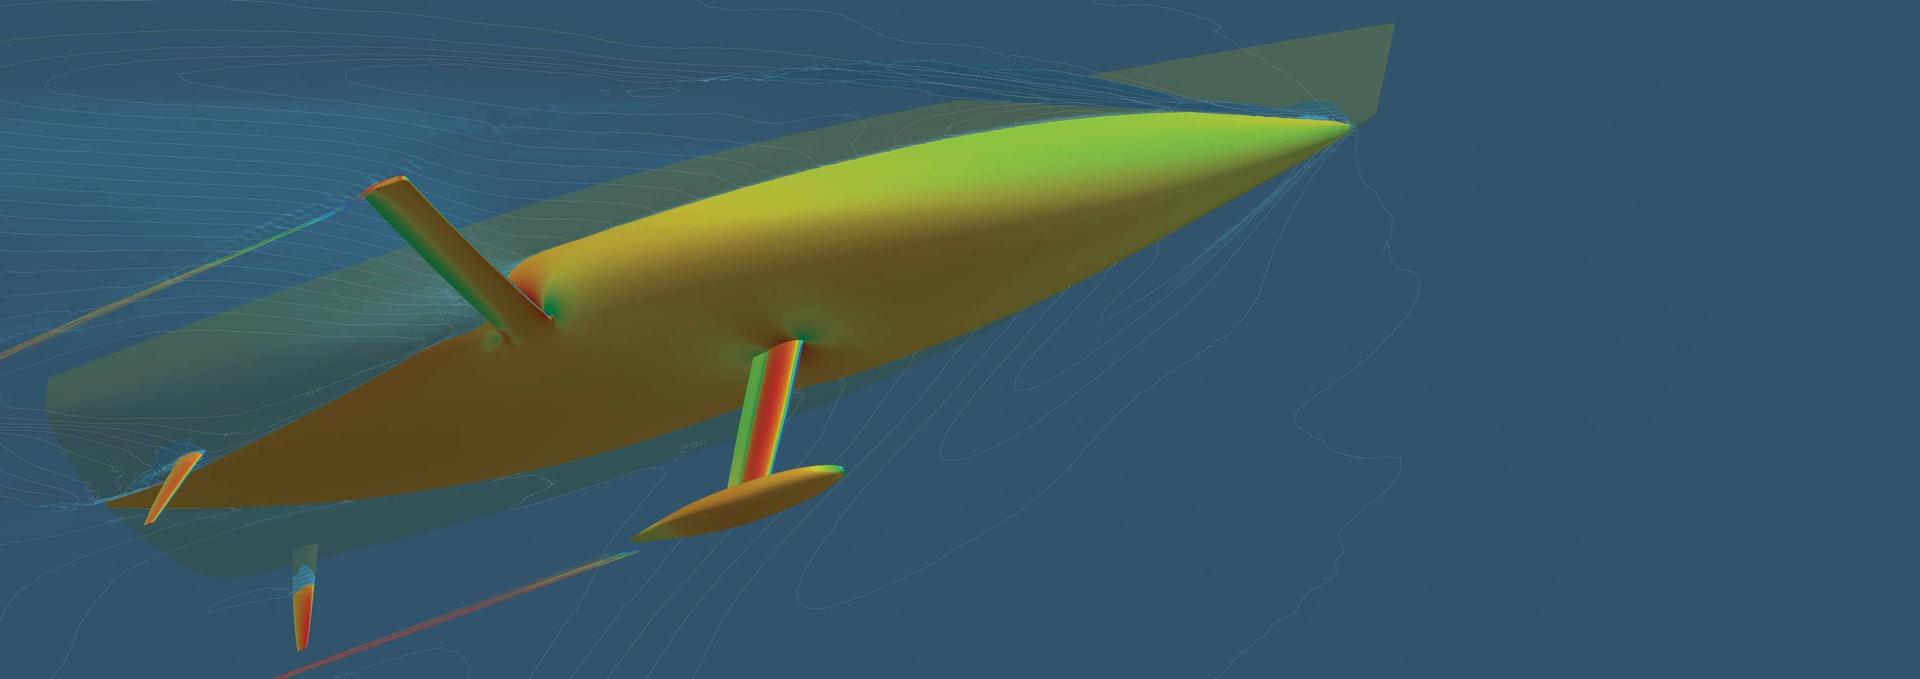 Bottom view of the hull with hydrofoils showing surface pressure & 3D streamlines.